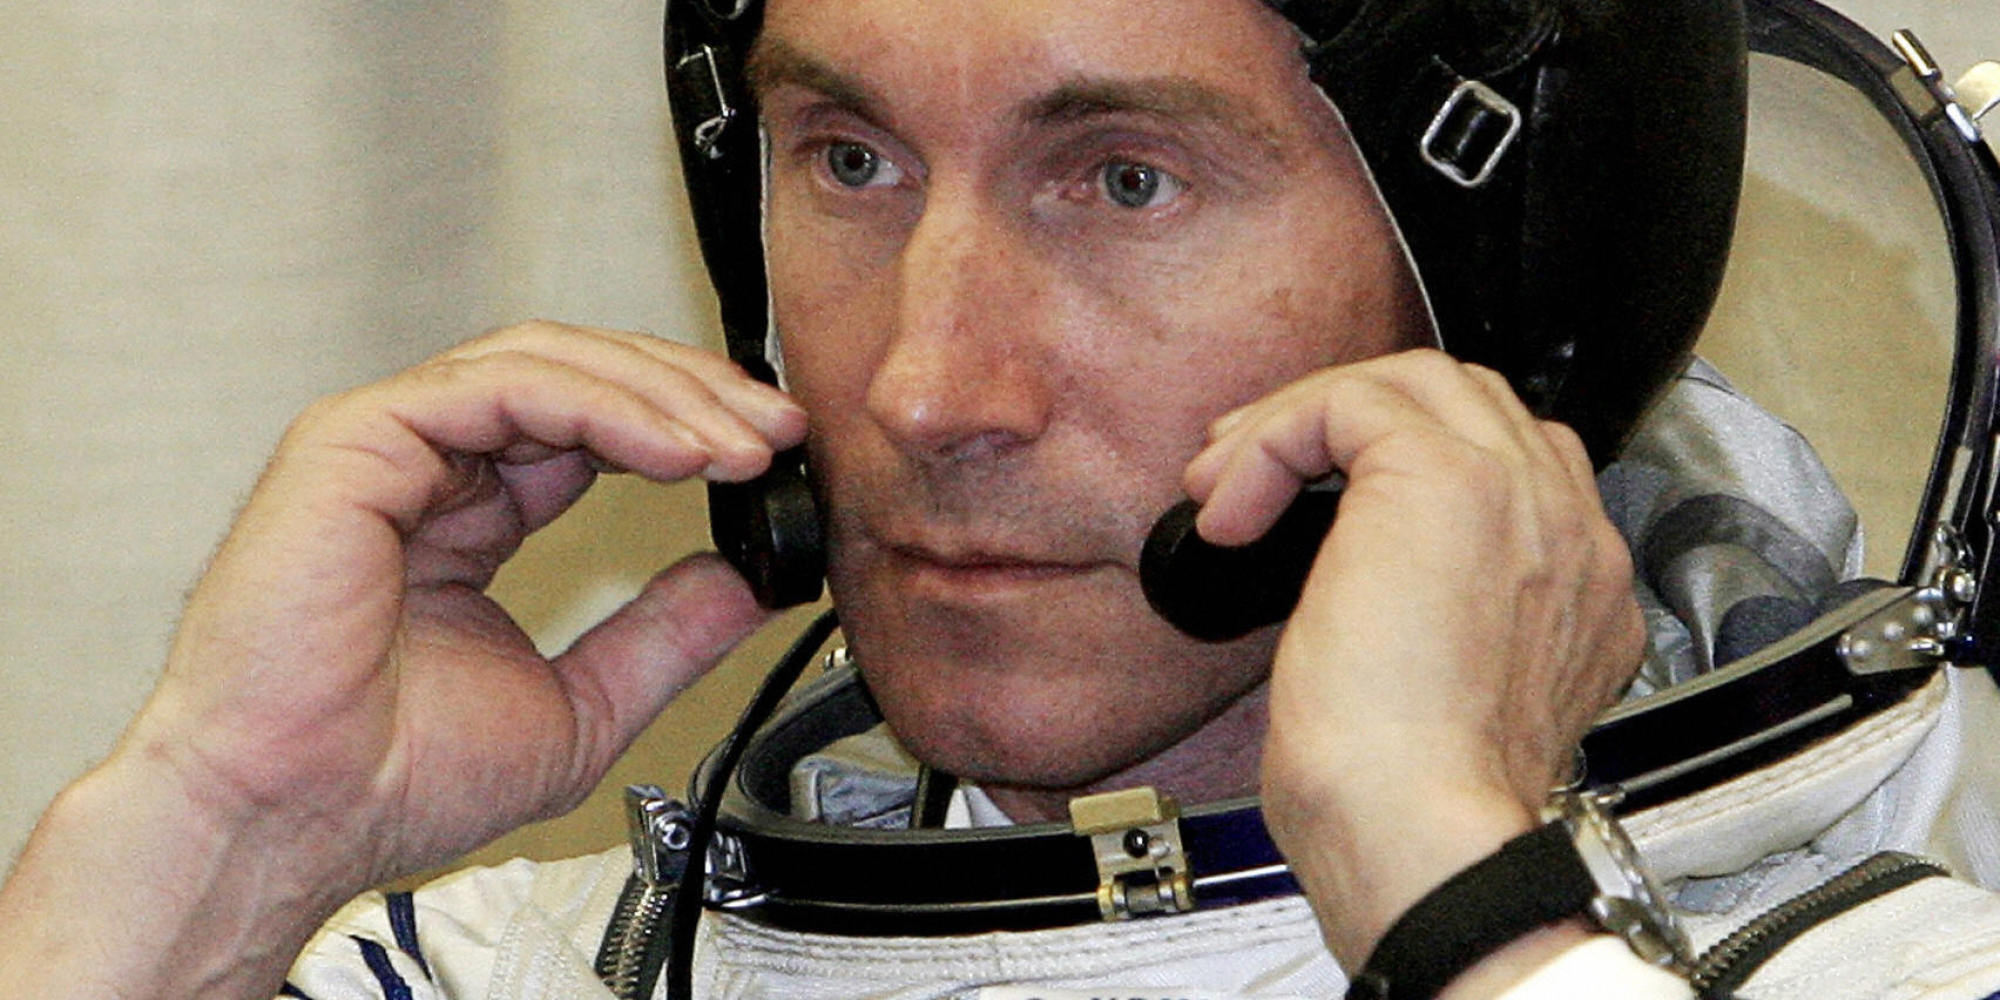 Baikonur, KAZAKHSTAN: (FILES) Picture taken 14 April 2005, shows Russian cosmonaut Sergey Krikalev as he checks his headset at the Baikonur cosmodrome prior launch of Soyuz-TMA-6 booster rocket. Veteran Russian cosmonaut Sergei Krikalev broke the record 16 August 2005 for the longest total time in space -- and still has two months left before returning to Earth. Krikalev, who has been aboard the International Space Station (ISS) since April 15, passed the record previously held by fellow-Russian Sergei Avdeyev, who spent a career total of 747 days, 14 hours, 14 minutes and 11 seconds in space, a spokeswoman for Russian ground control told AFP. AFP PHOTO / MAXIM MARMUR (Photo credit should read MAXIM MARMUR/AFP/Getty Images)